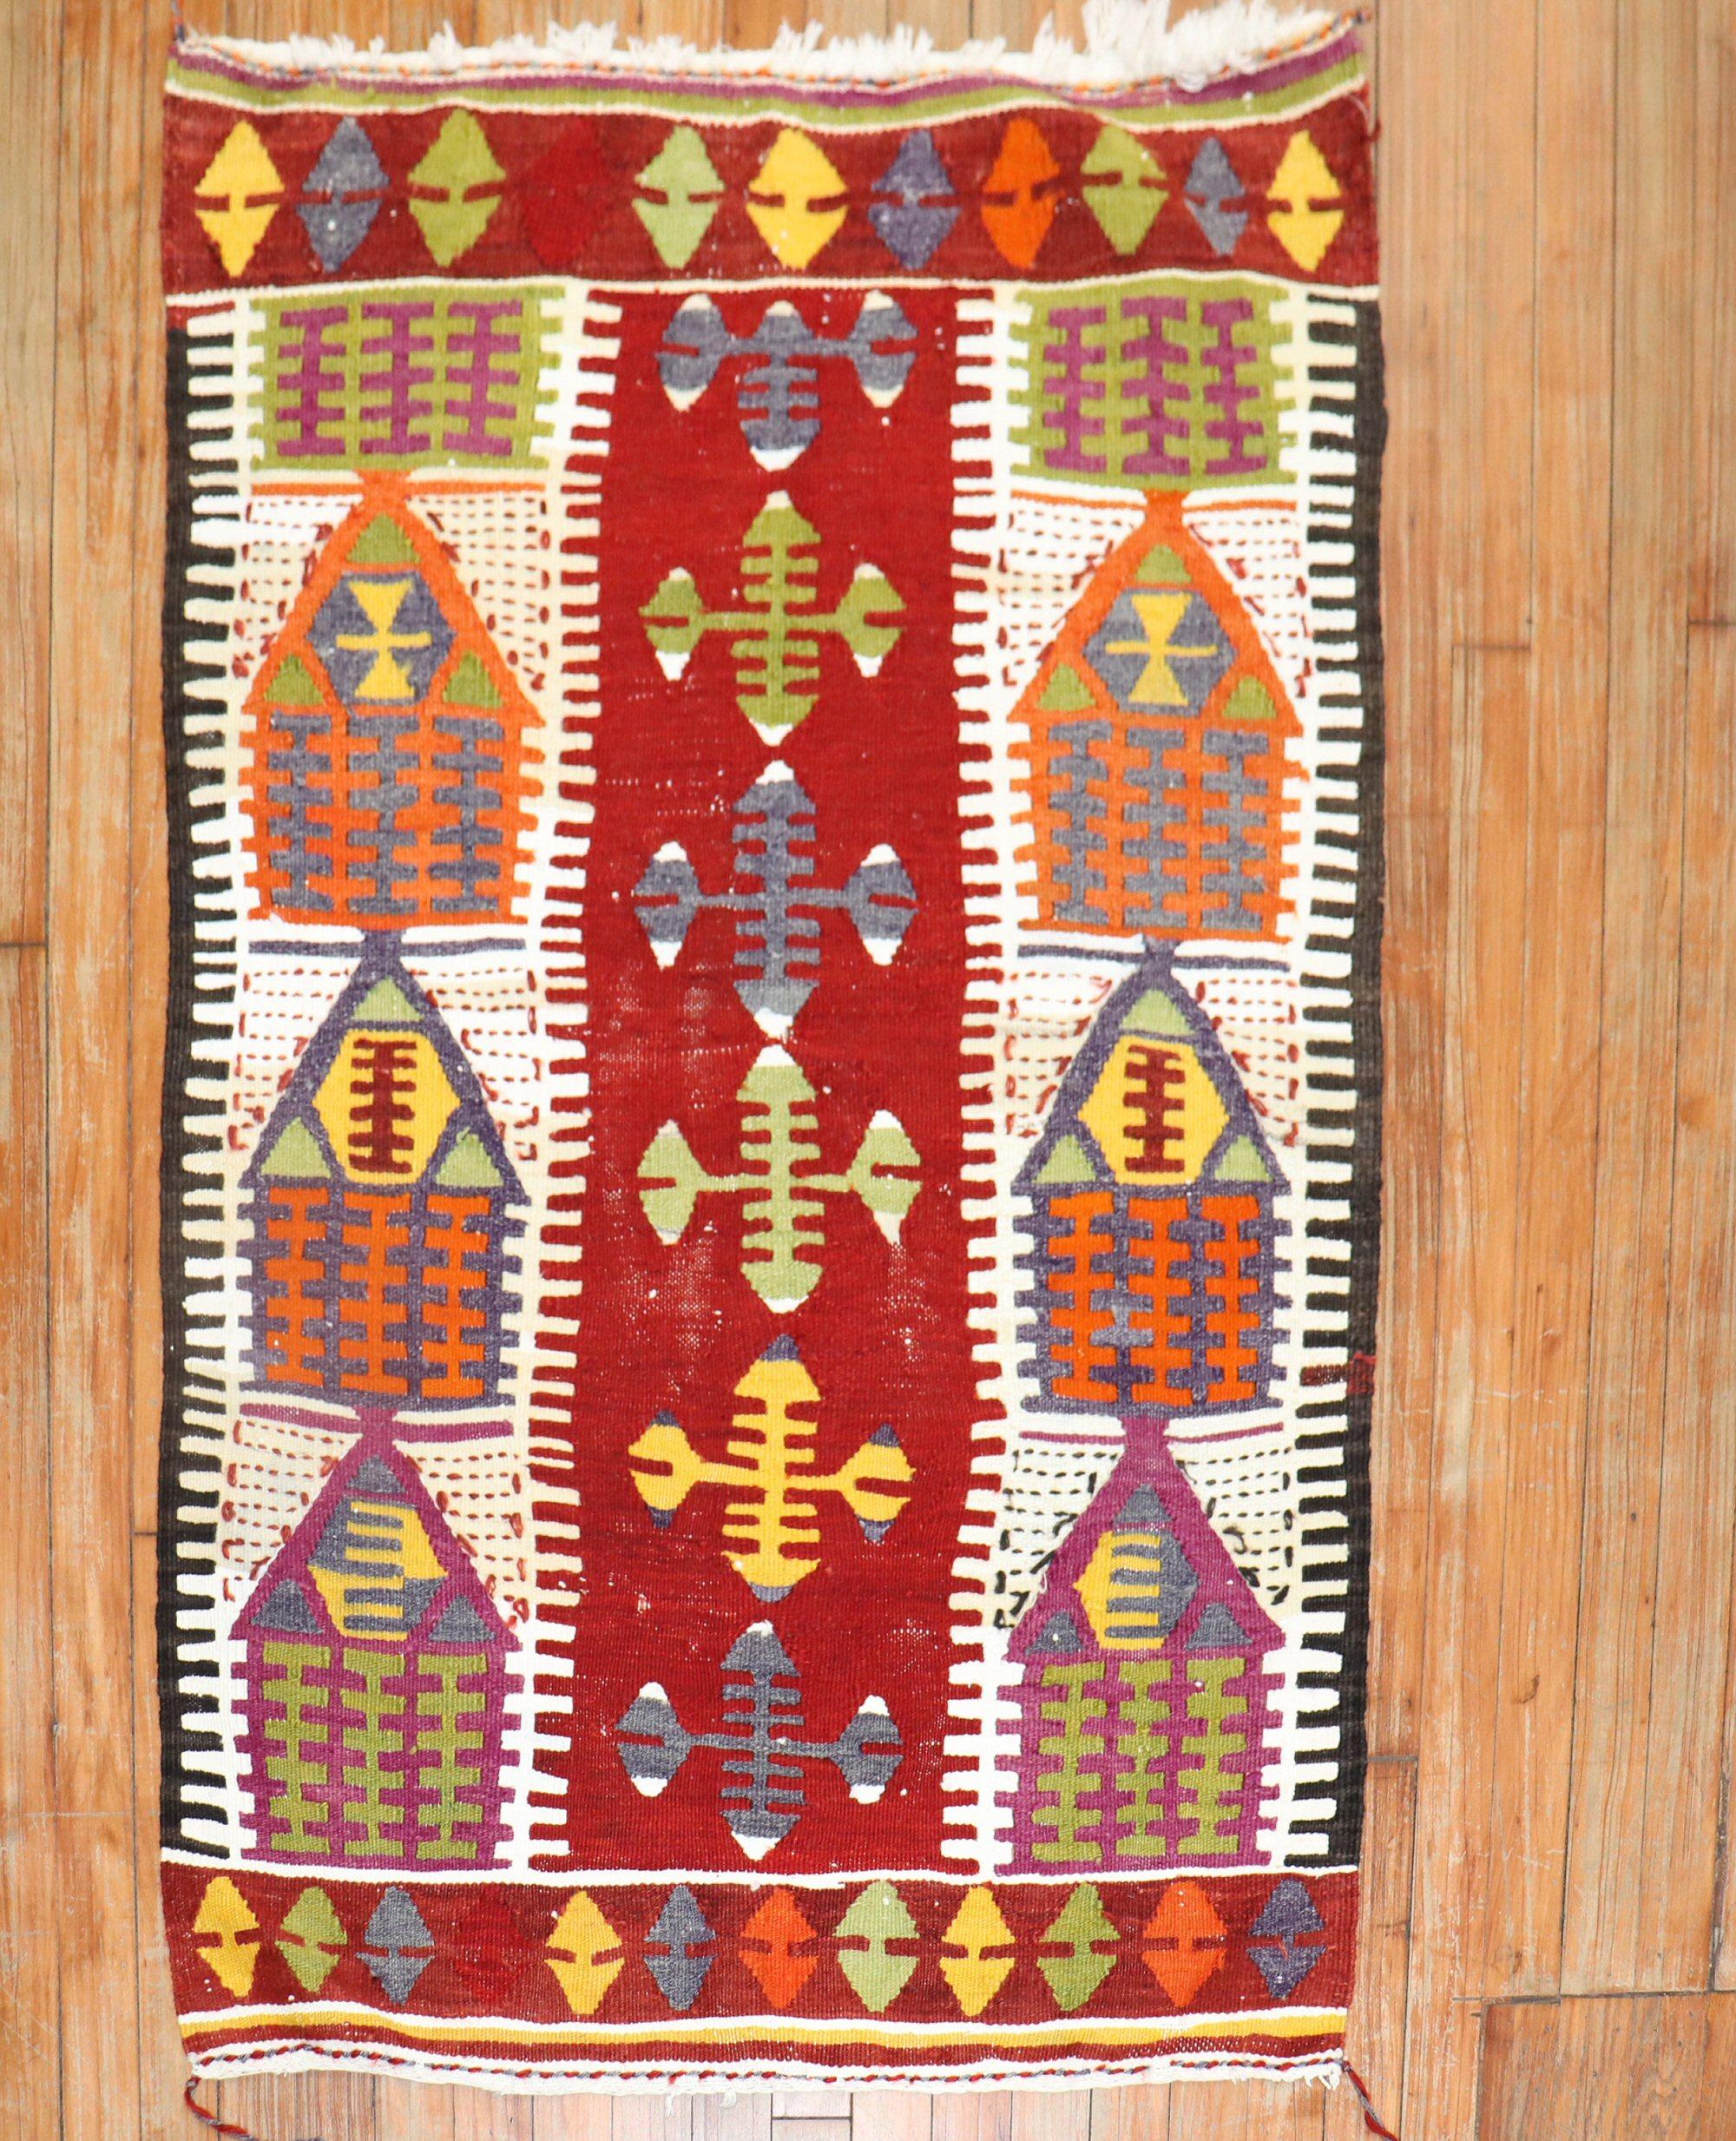 Mid 20th century Turkish Kilim with a directional prayer motif in bright colors

Measures: 2'10'' x 4'4''.